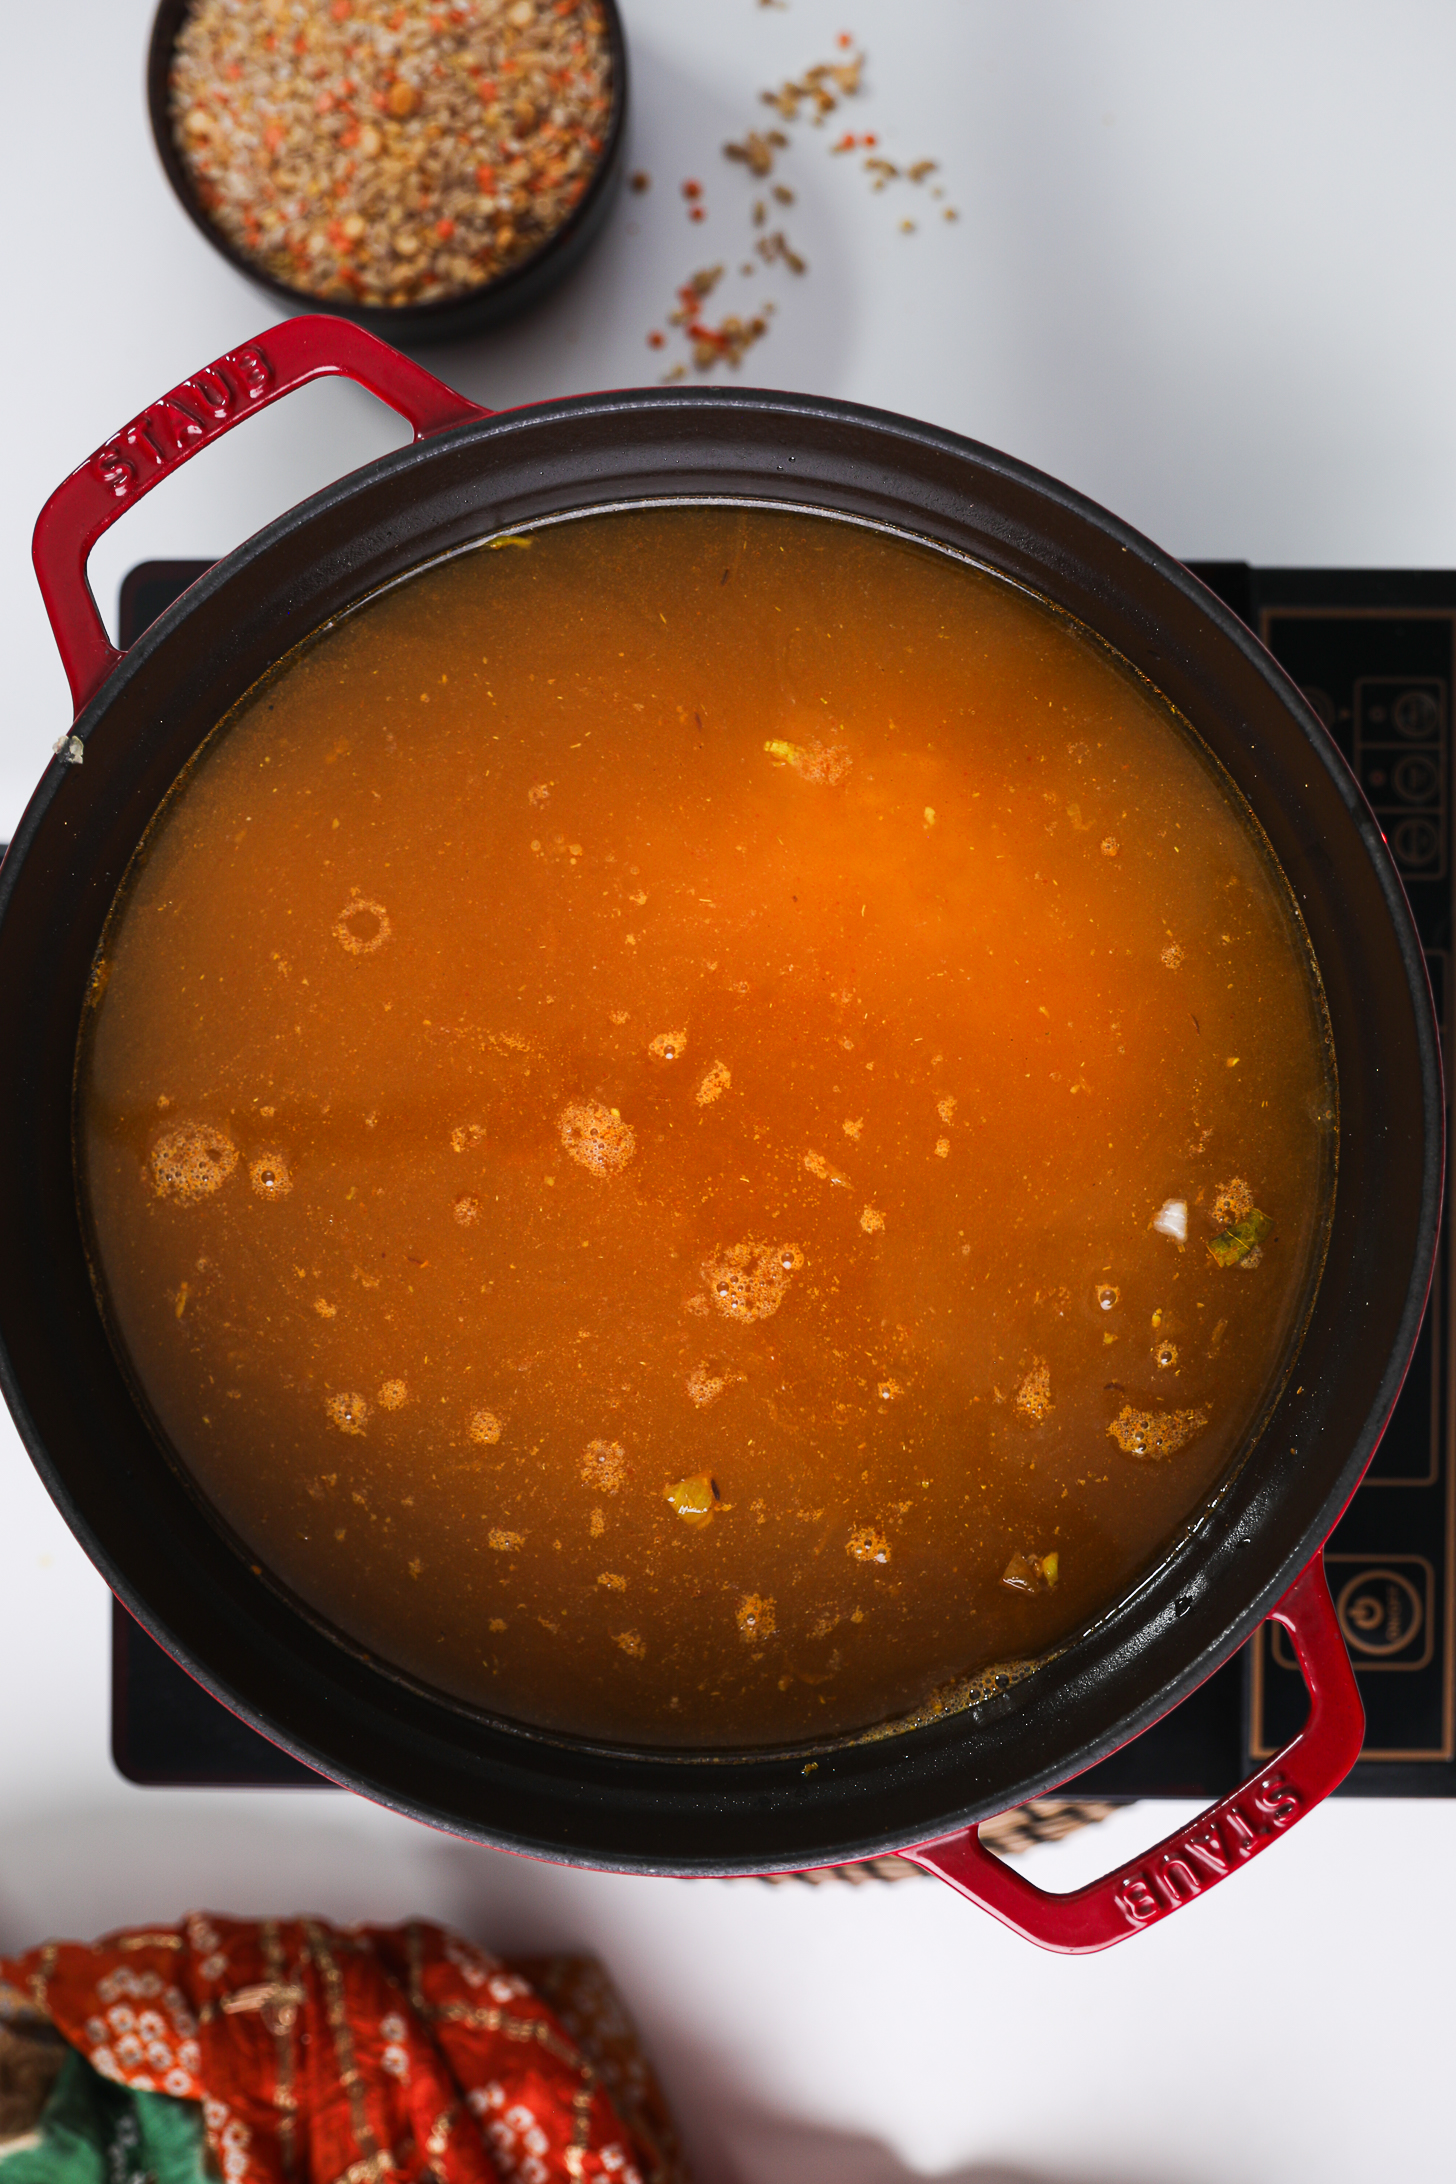 Orange-colored liquid-filled cooking pot on a mobile cooktop.